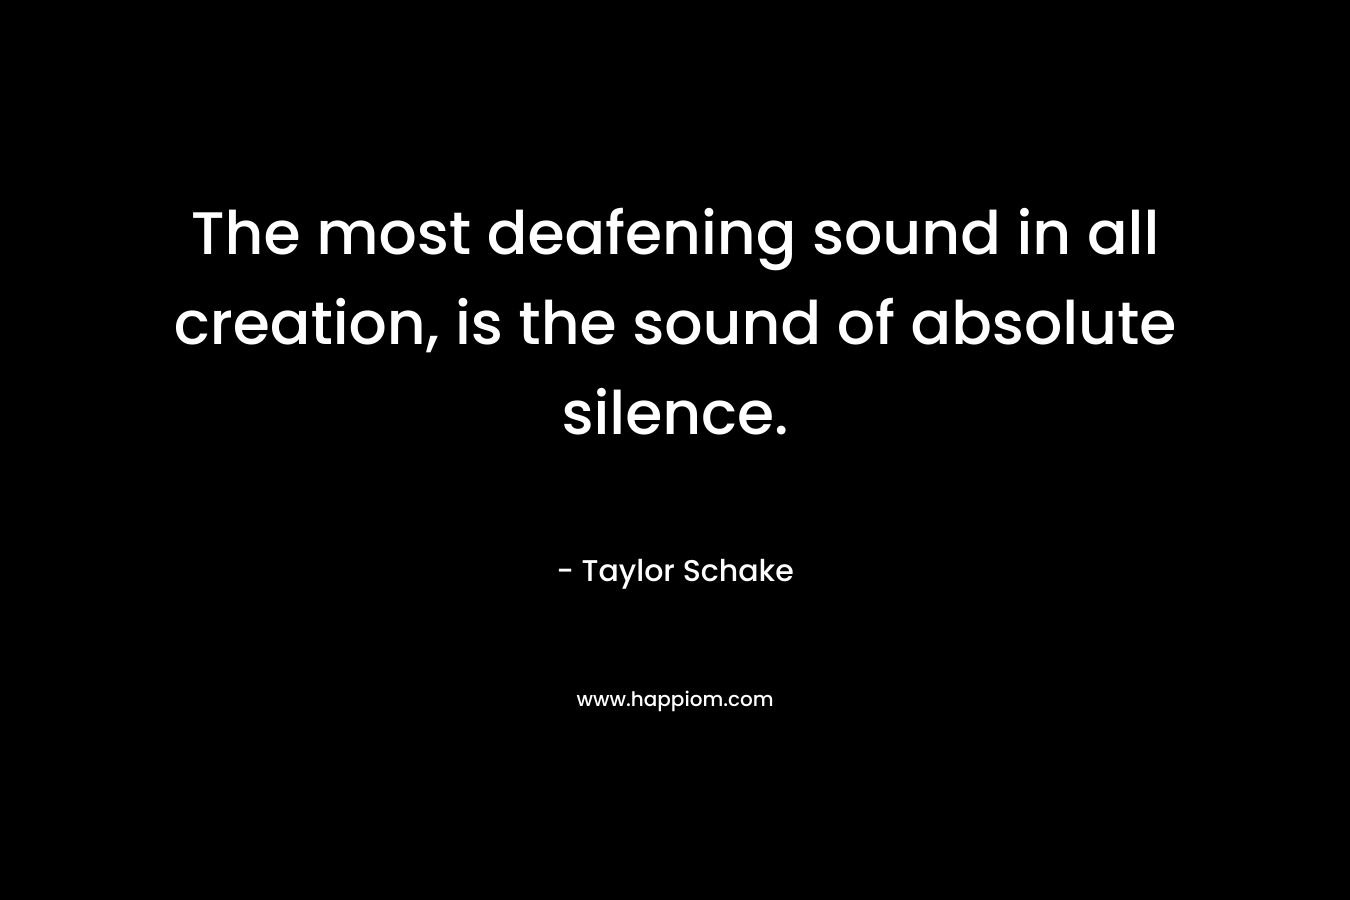 The most deafening sound in all creation, is the sound of absolute silence. – Taylor Schake